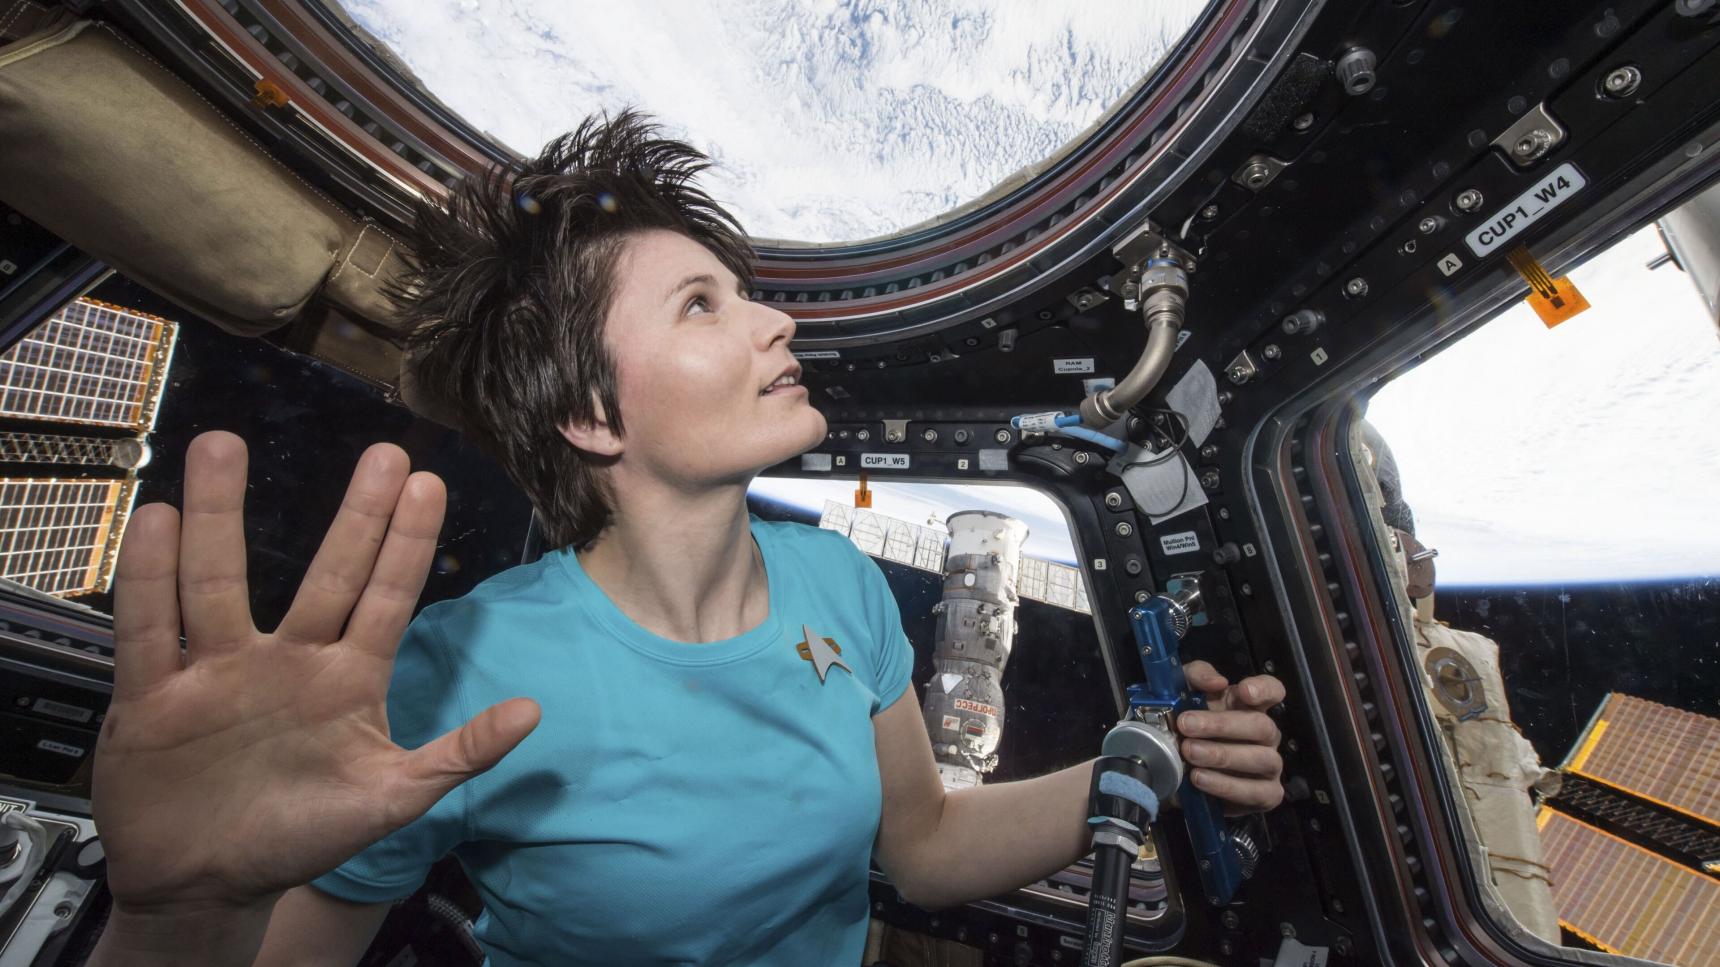 sinopsis The Wonderful: Stories from the Space Station